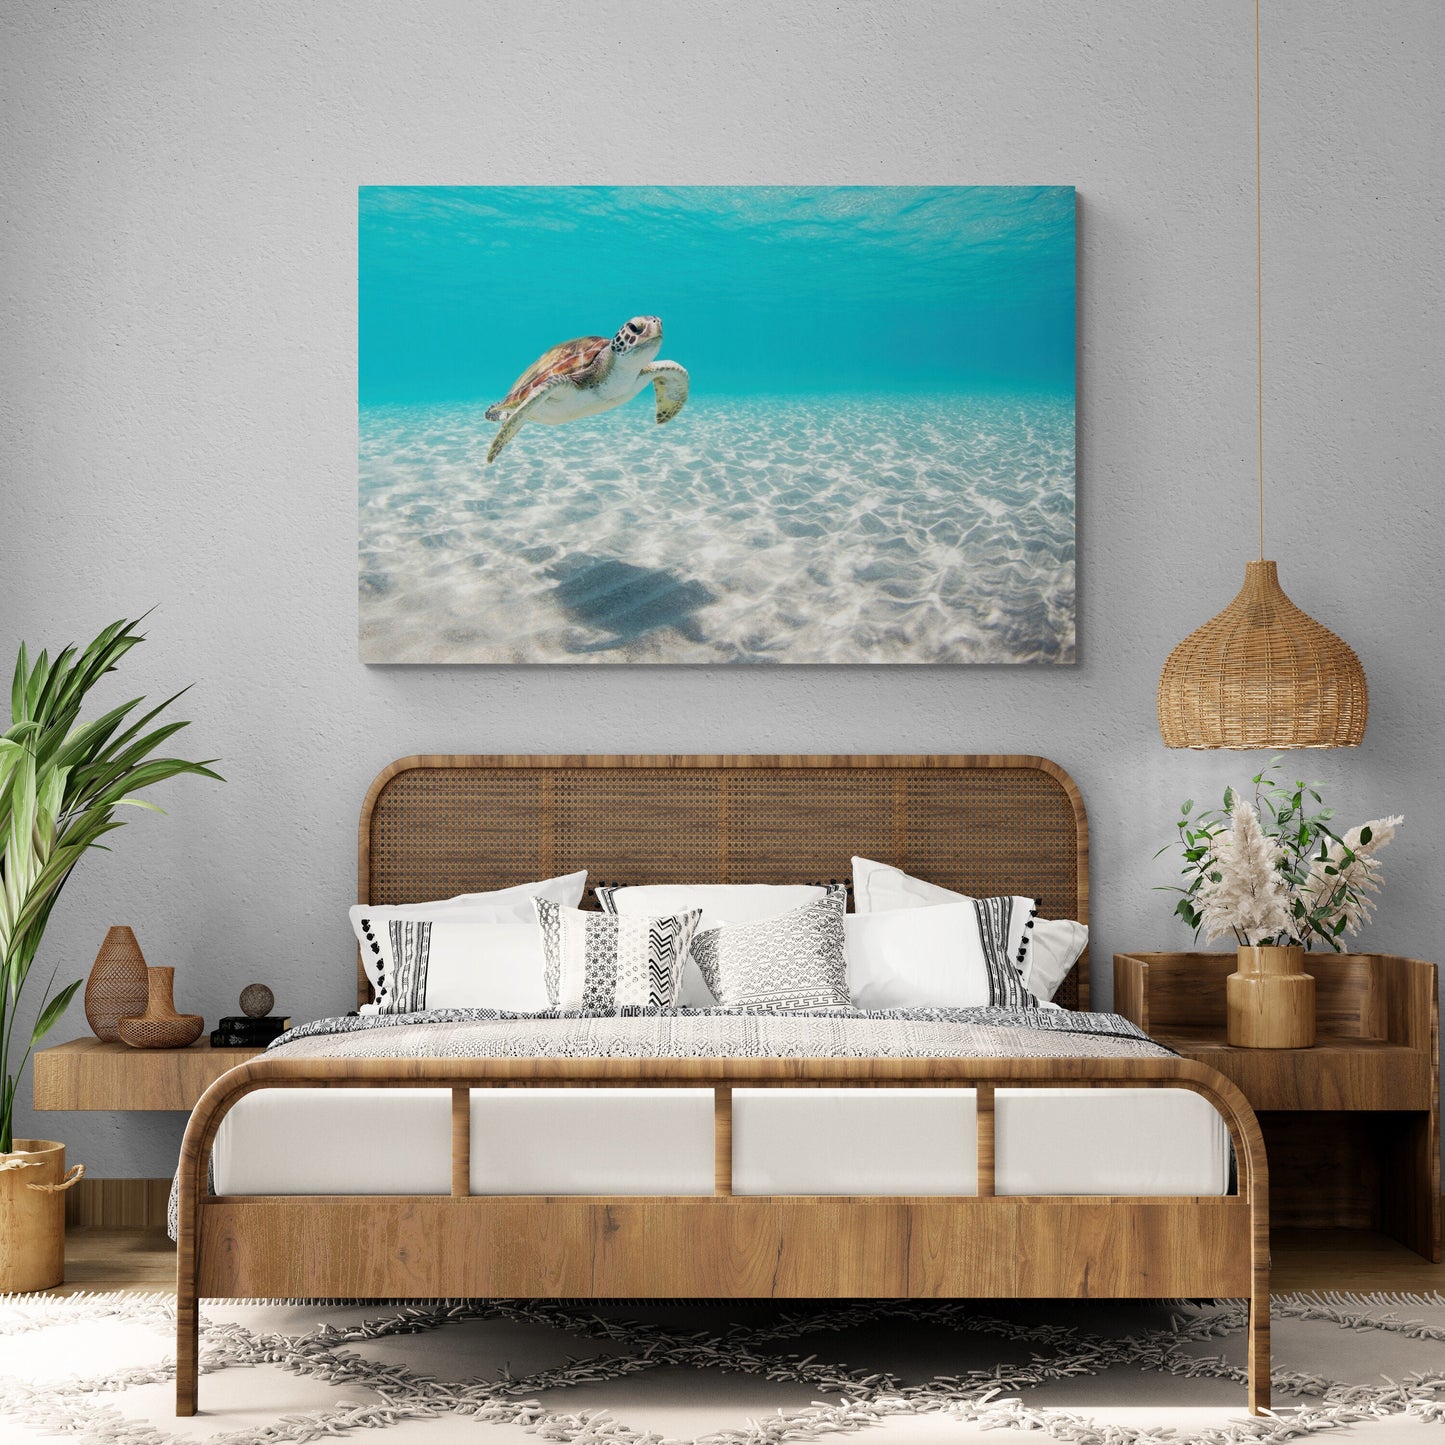 Green Sea Turtle Fine Art Print titled "Tranquility"